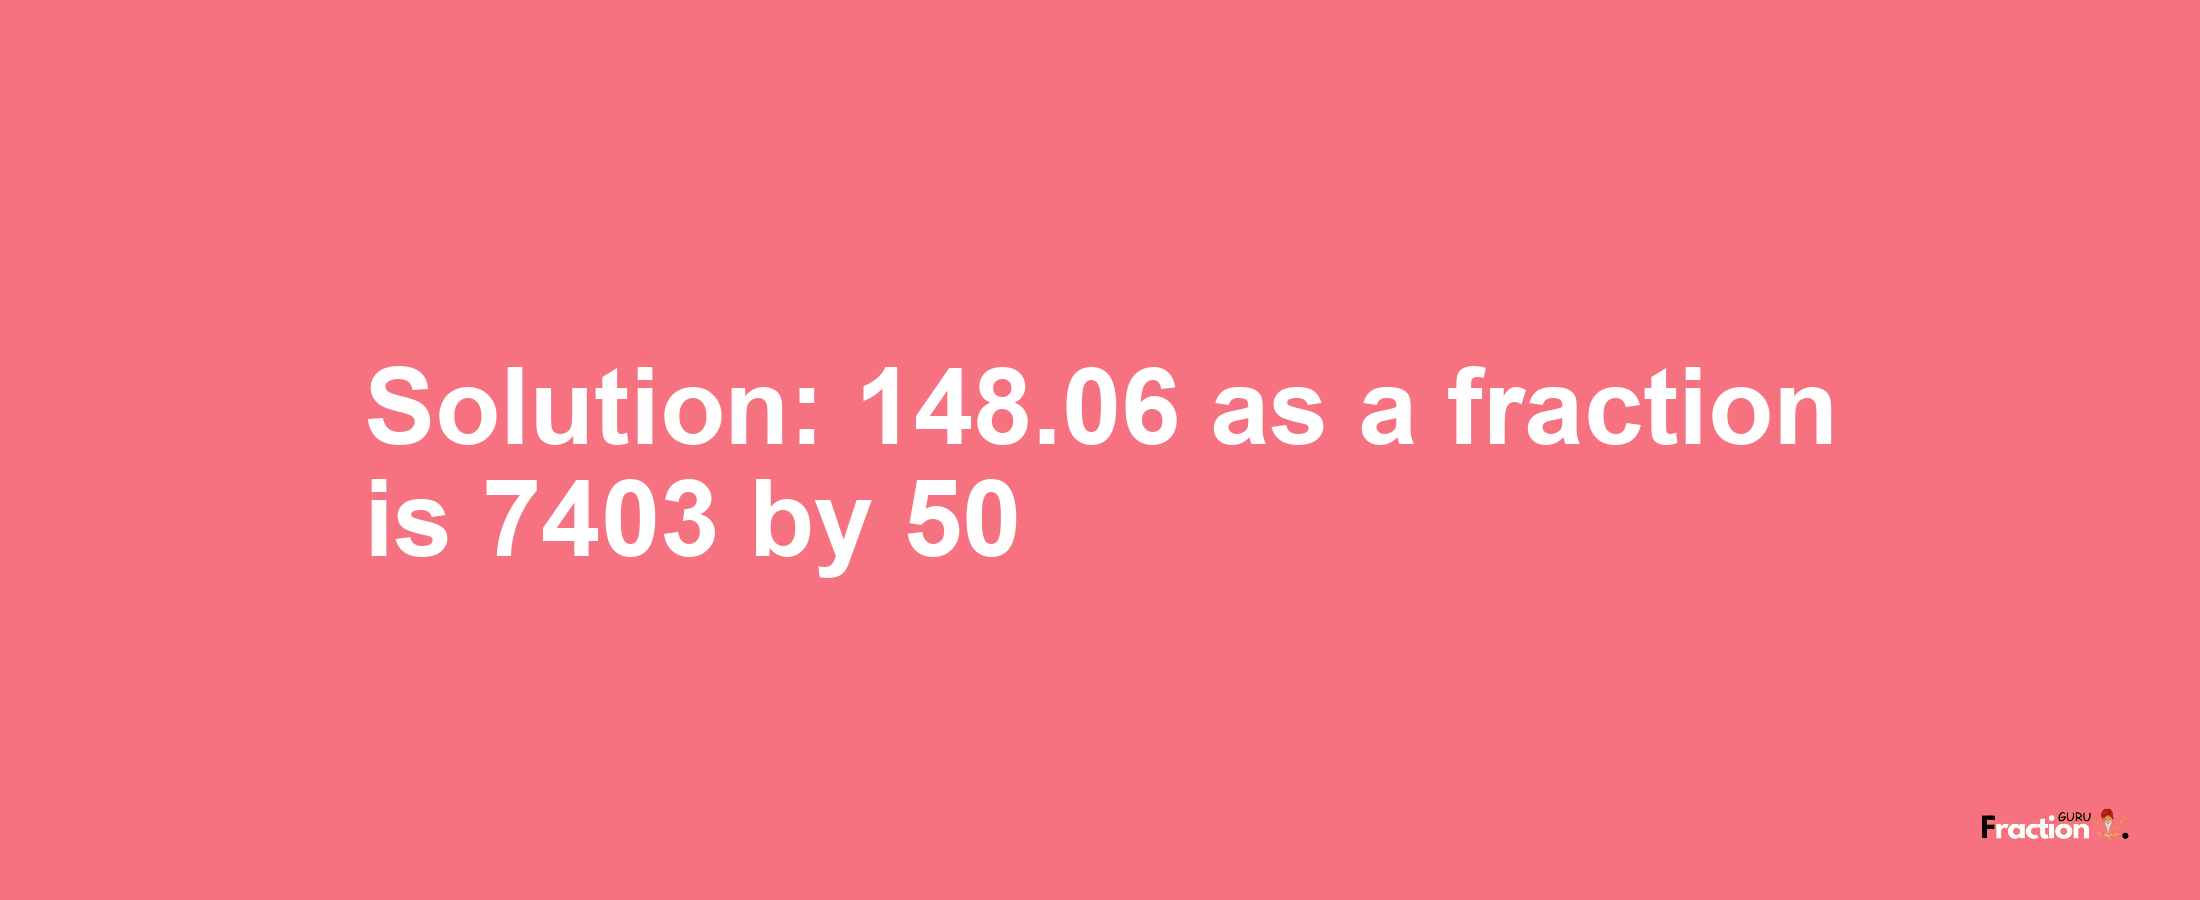 Solution:148.06 as a fraction is 7403/50